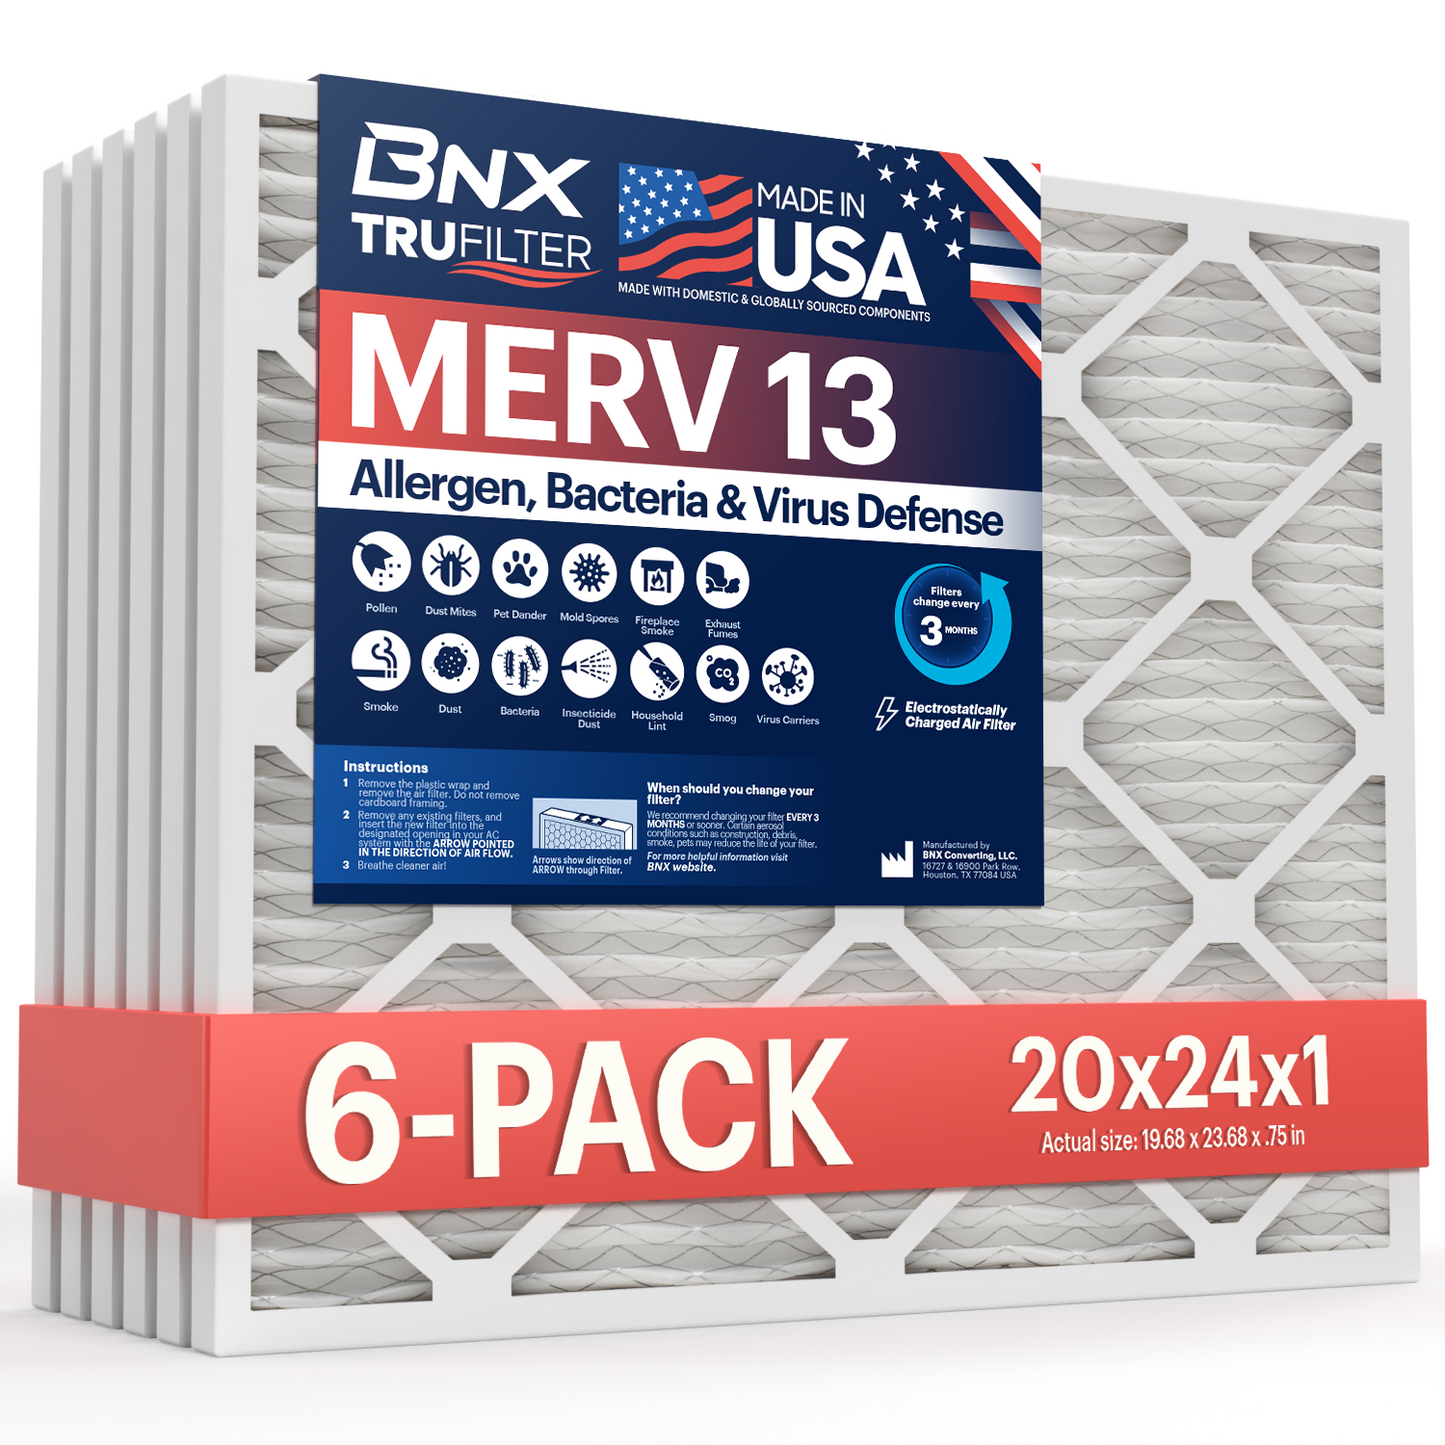 BNX TruFilter 20x24x1 MERV 13 Pleated Air Filter – Made in USA (6-Pack)